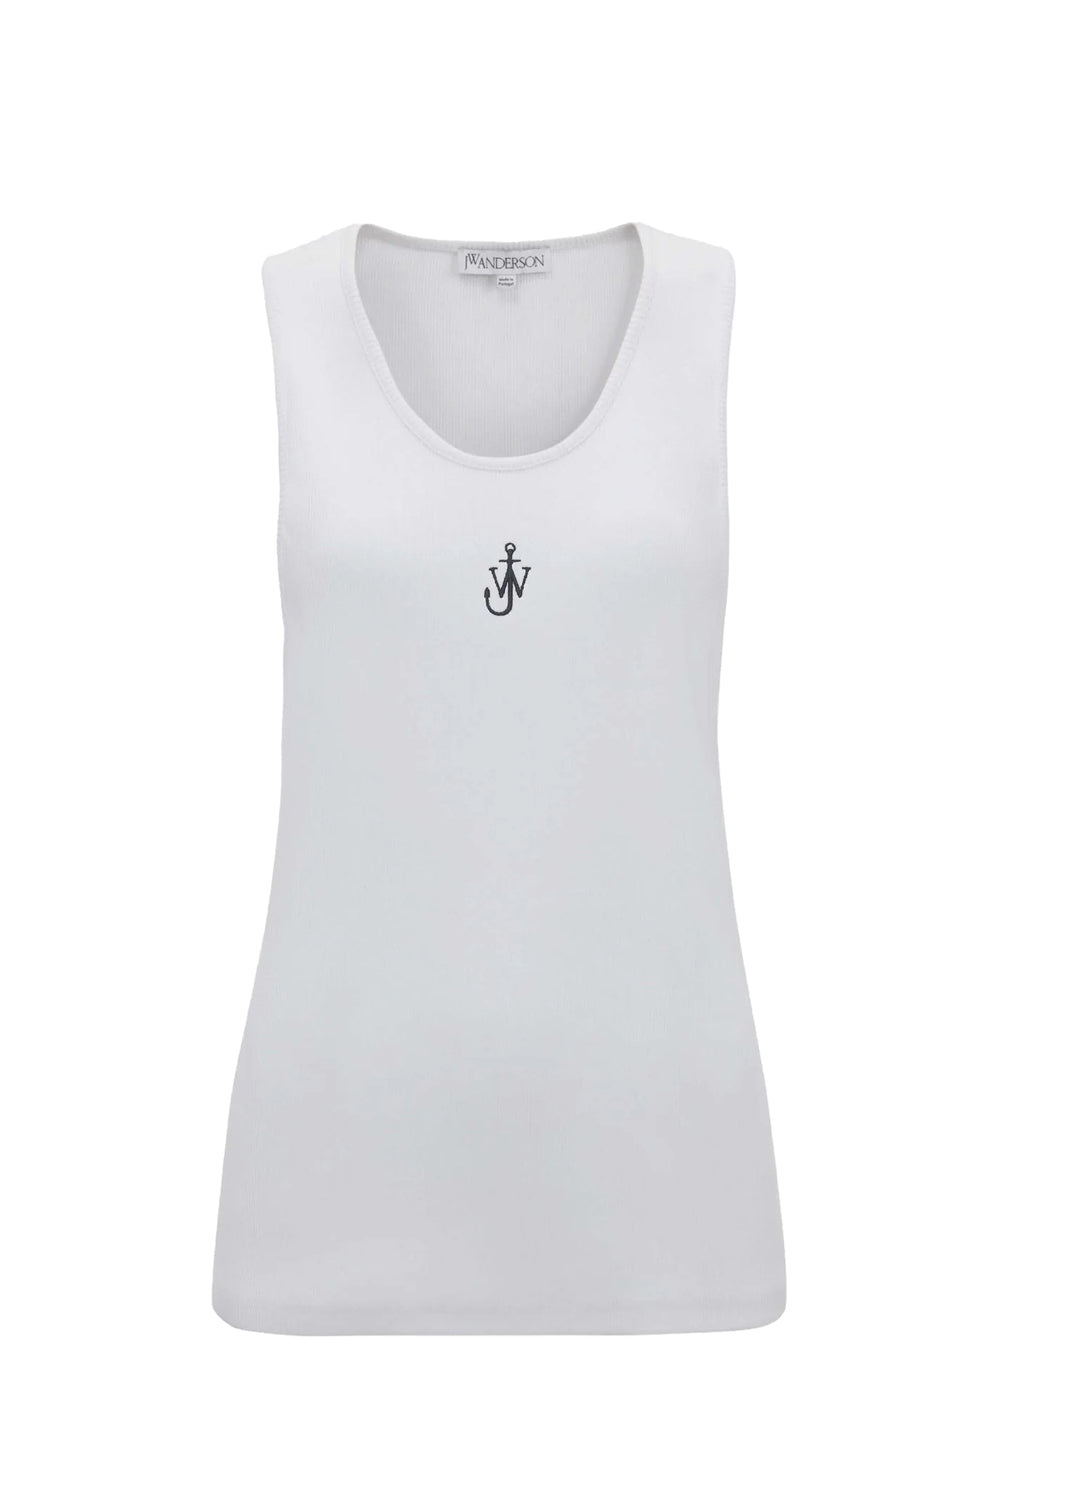 Anchor embroidery tank top